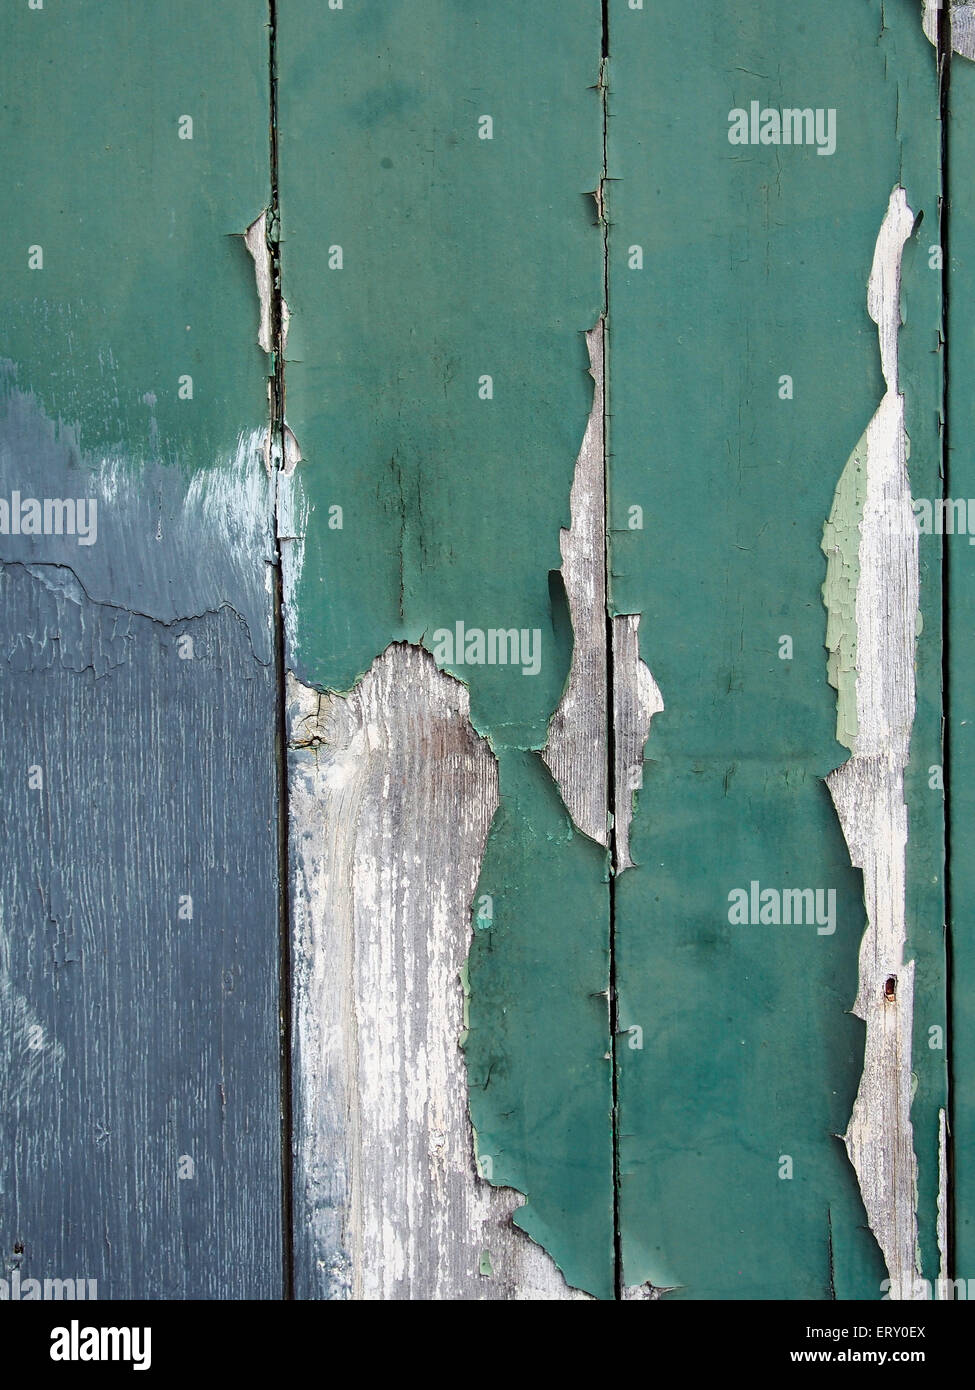 Green paint flaking off an old wooden door showing grey undercoat and primer underneath. Stock Photo